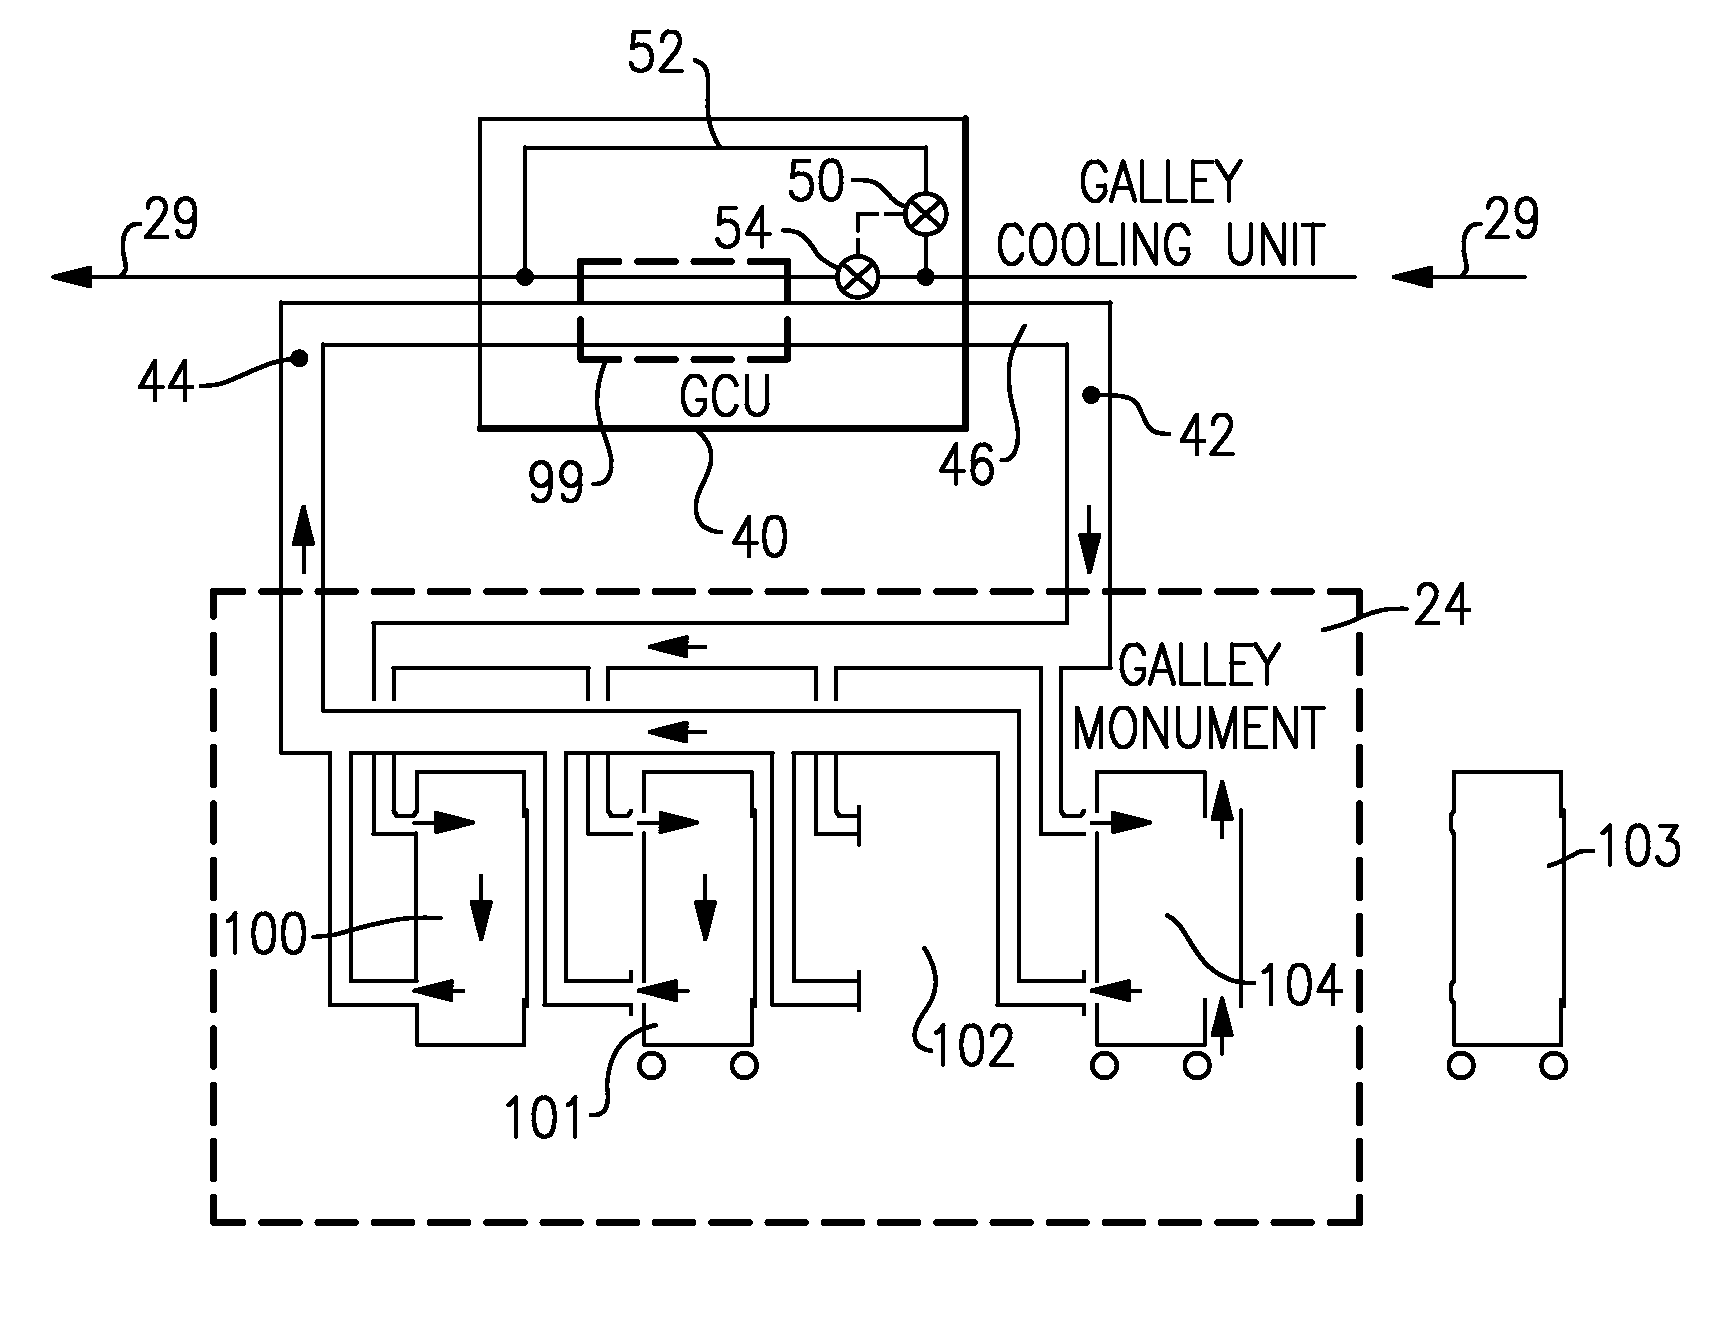 Compartment cooling loss identification for efficient system operation